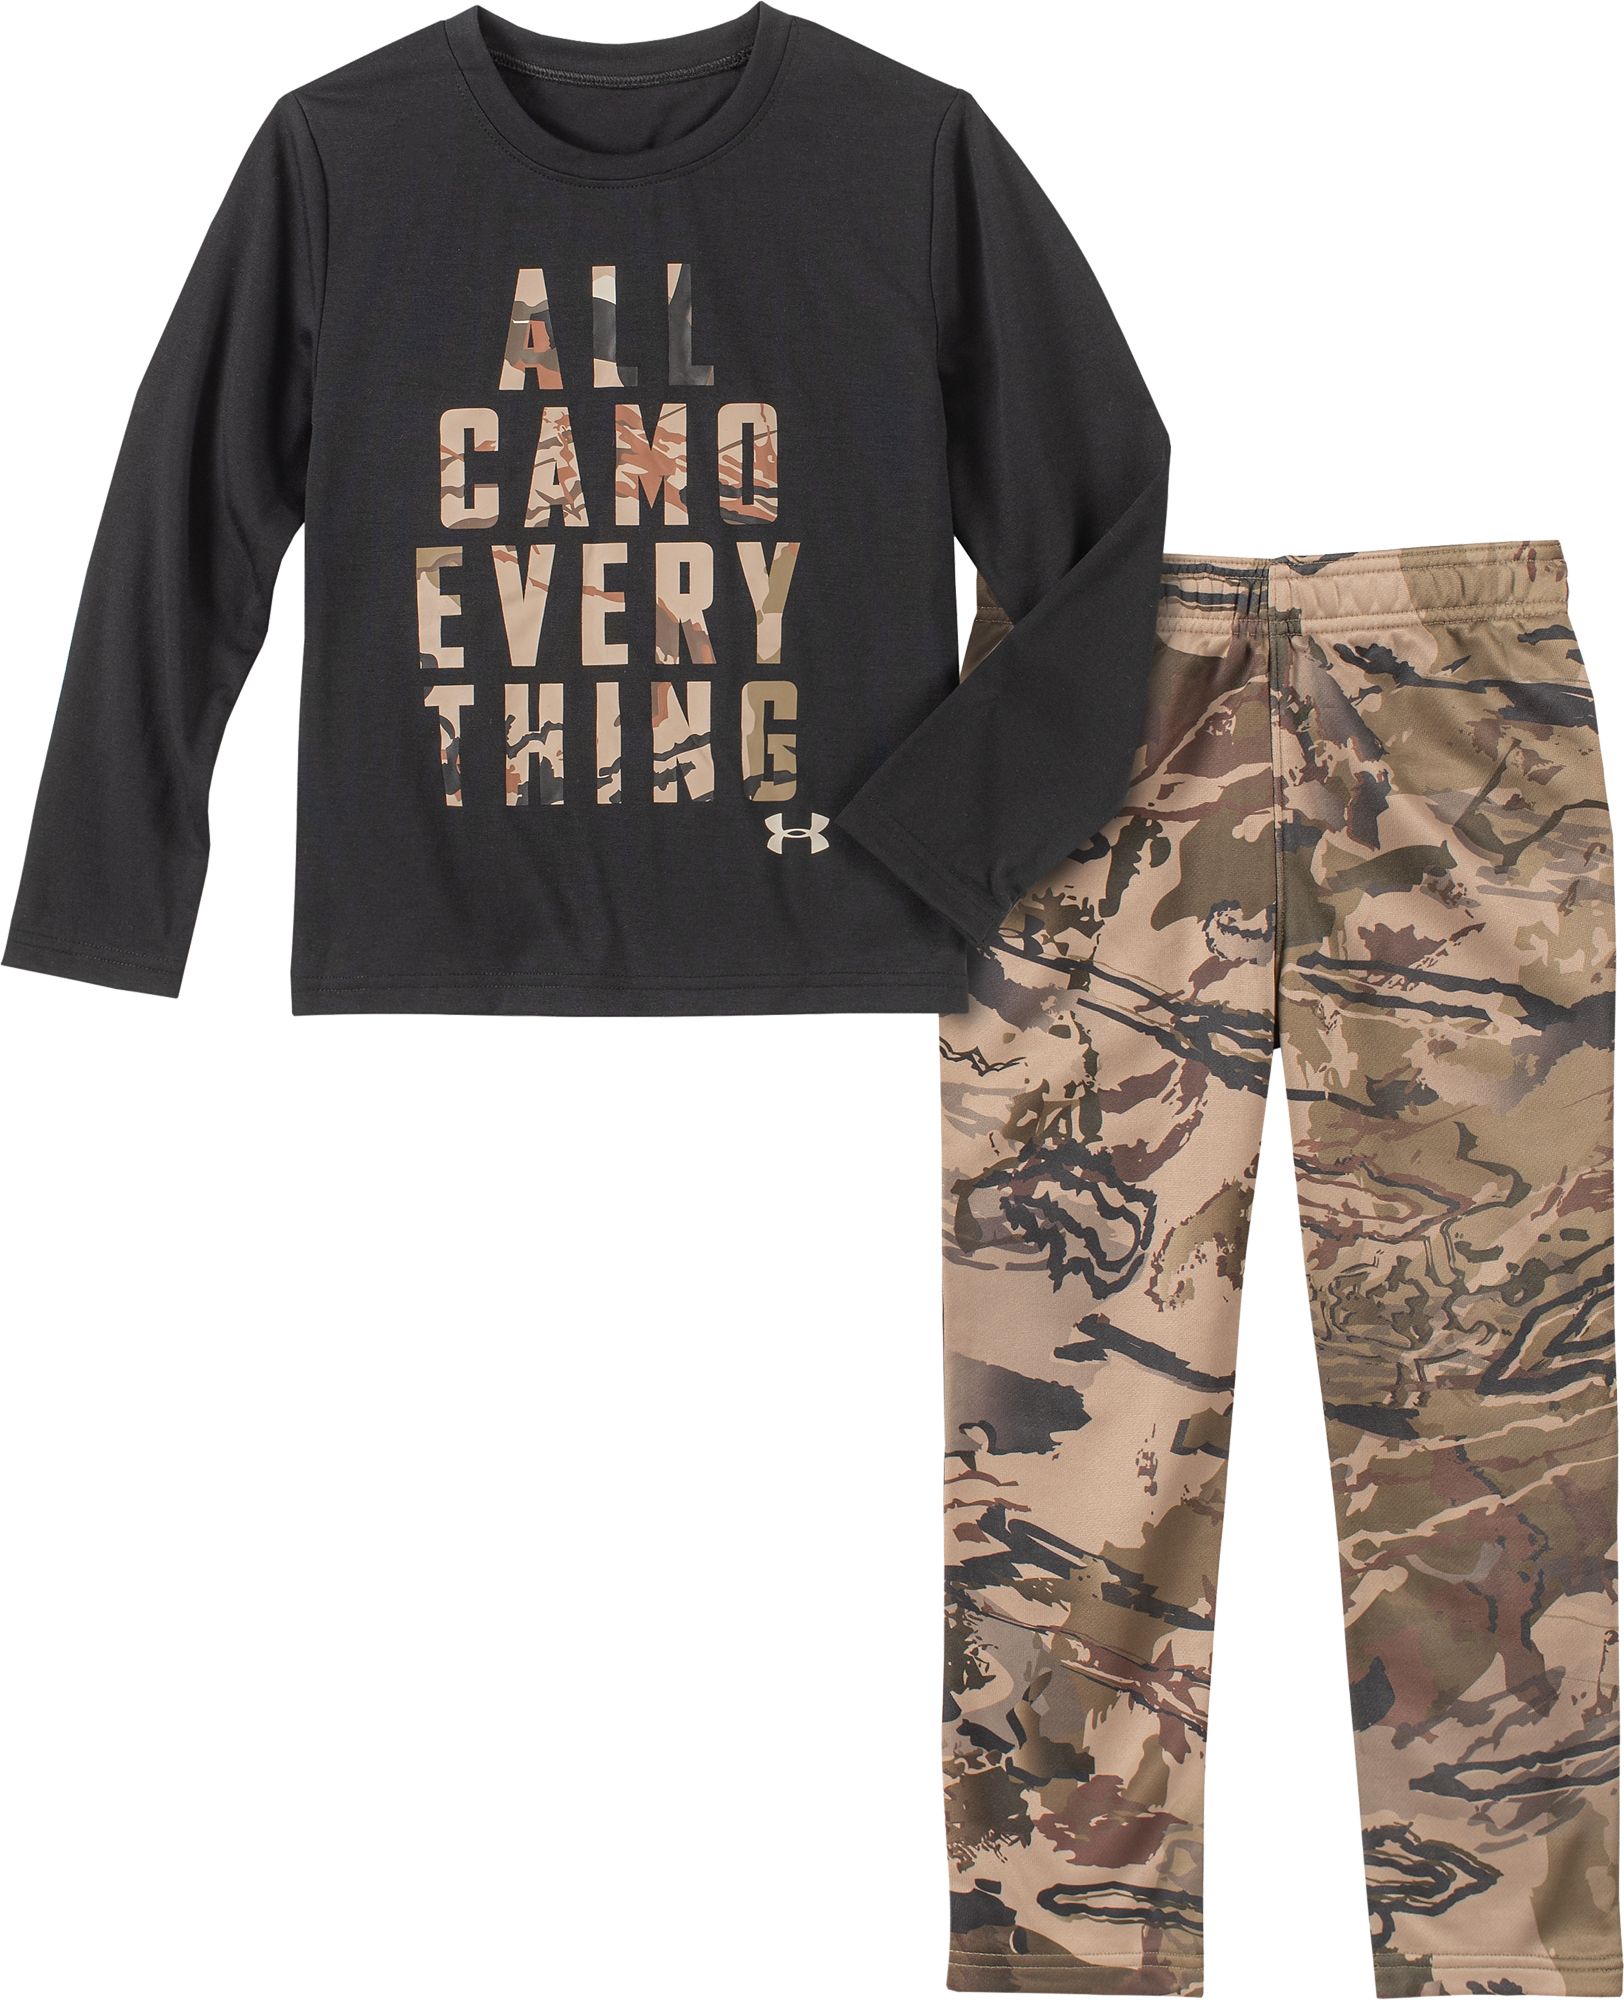 under armour youth hunting bibs